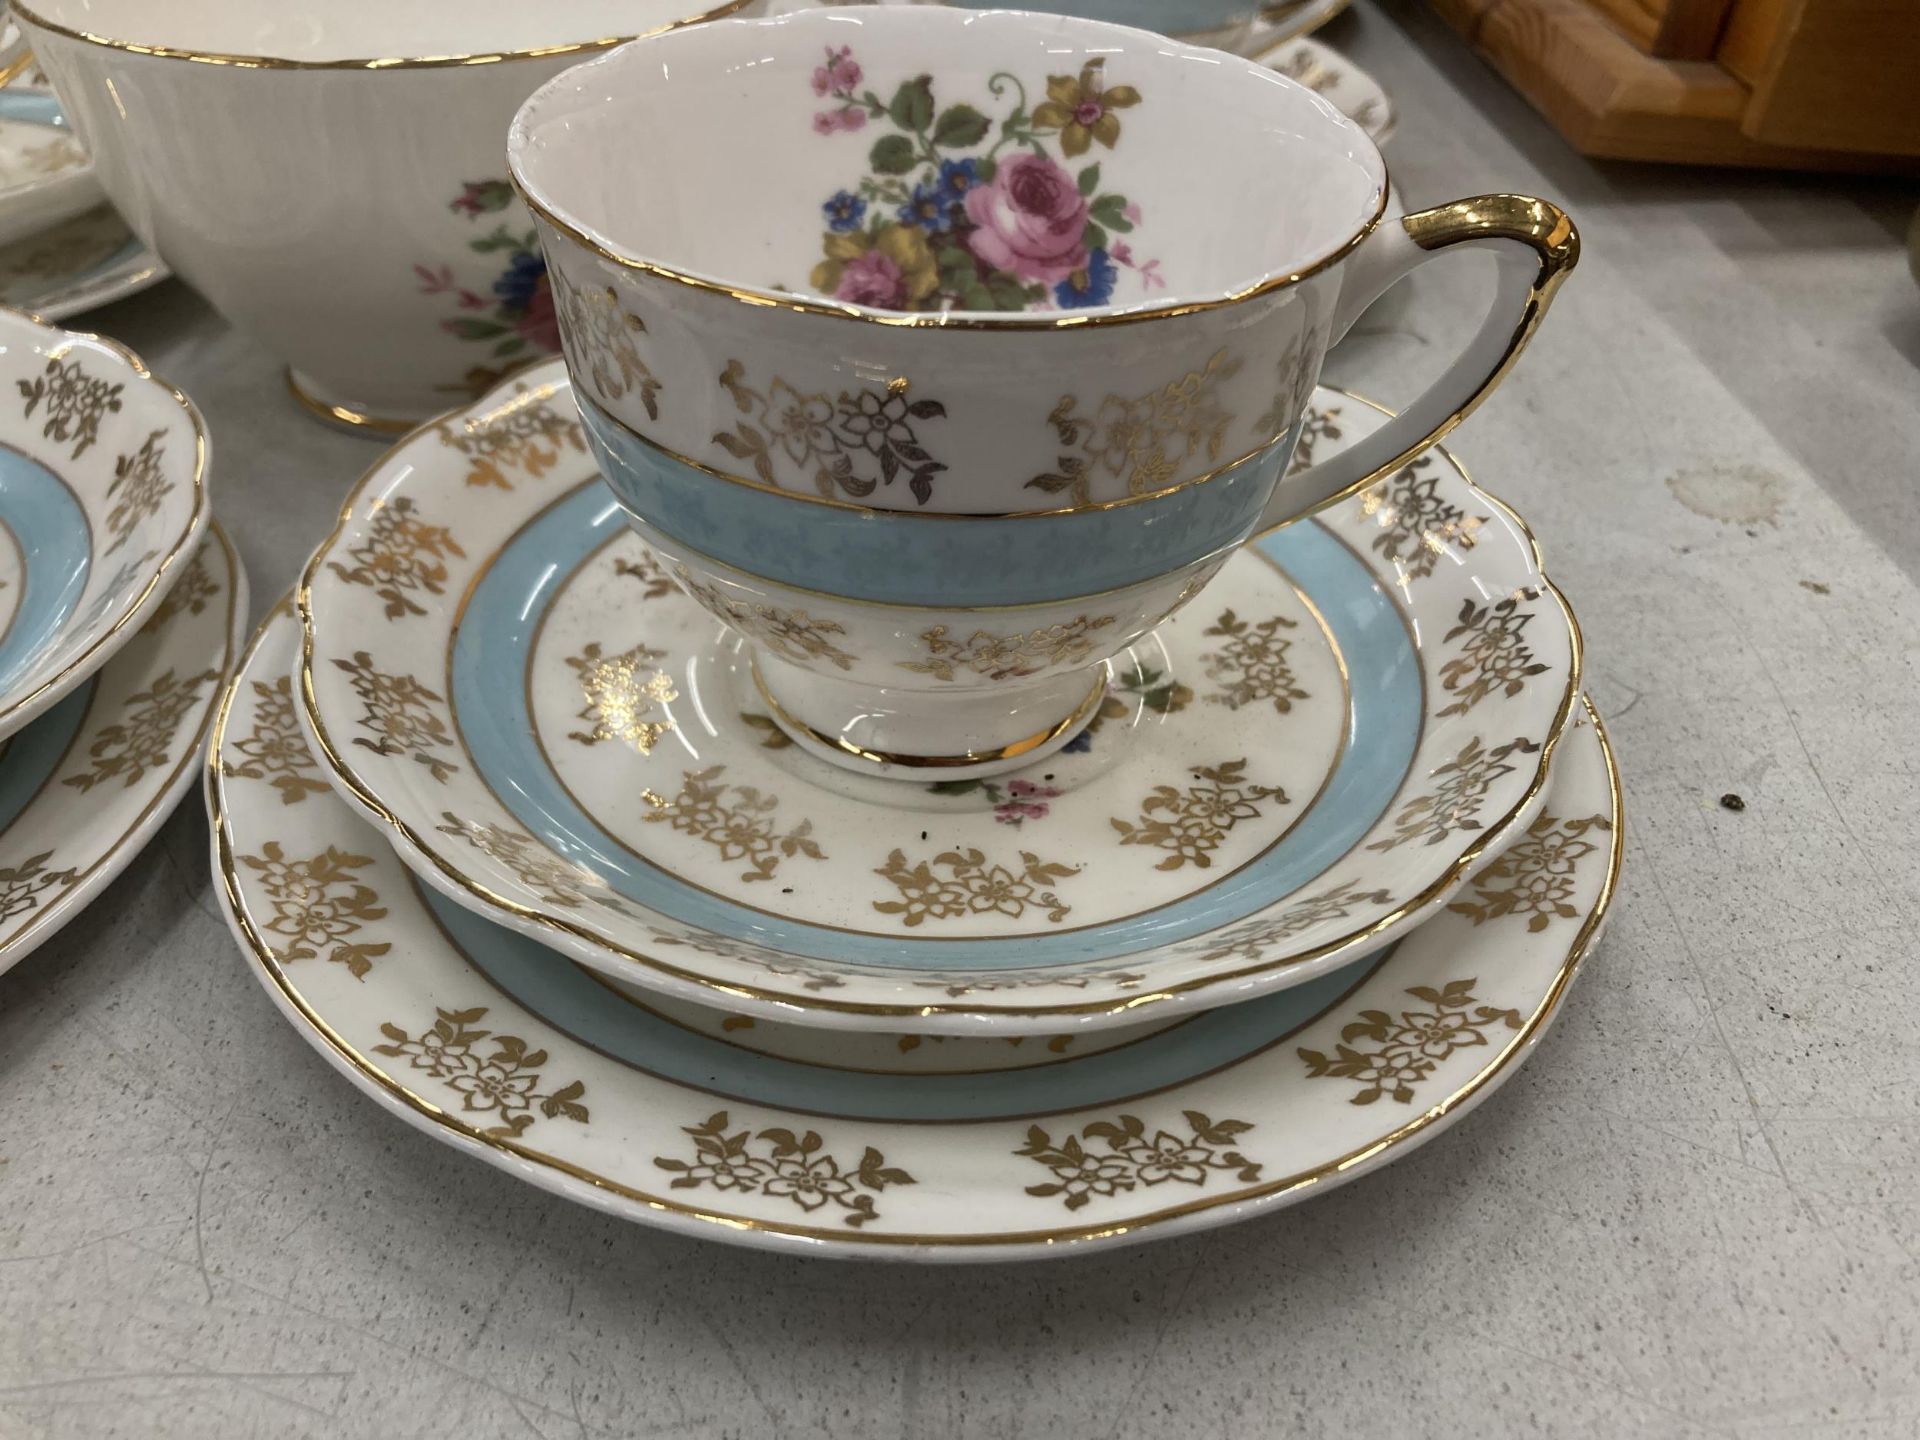 A QUANTITY OF VINTAGE CHINA CUPS, SAUCERS, SIDE PLATES, ETC TO INCLUDE MINTON 'CONSORT' - Image 2 of 6